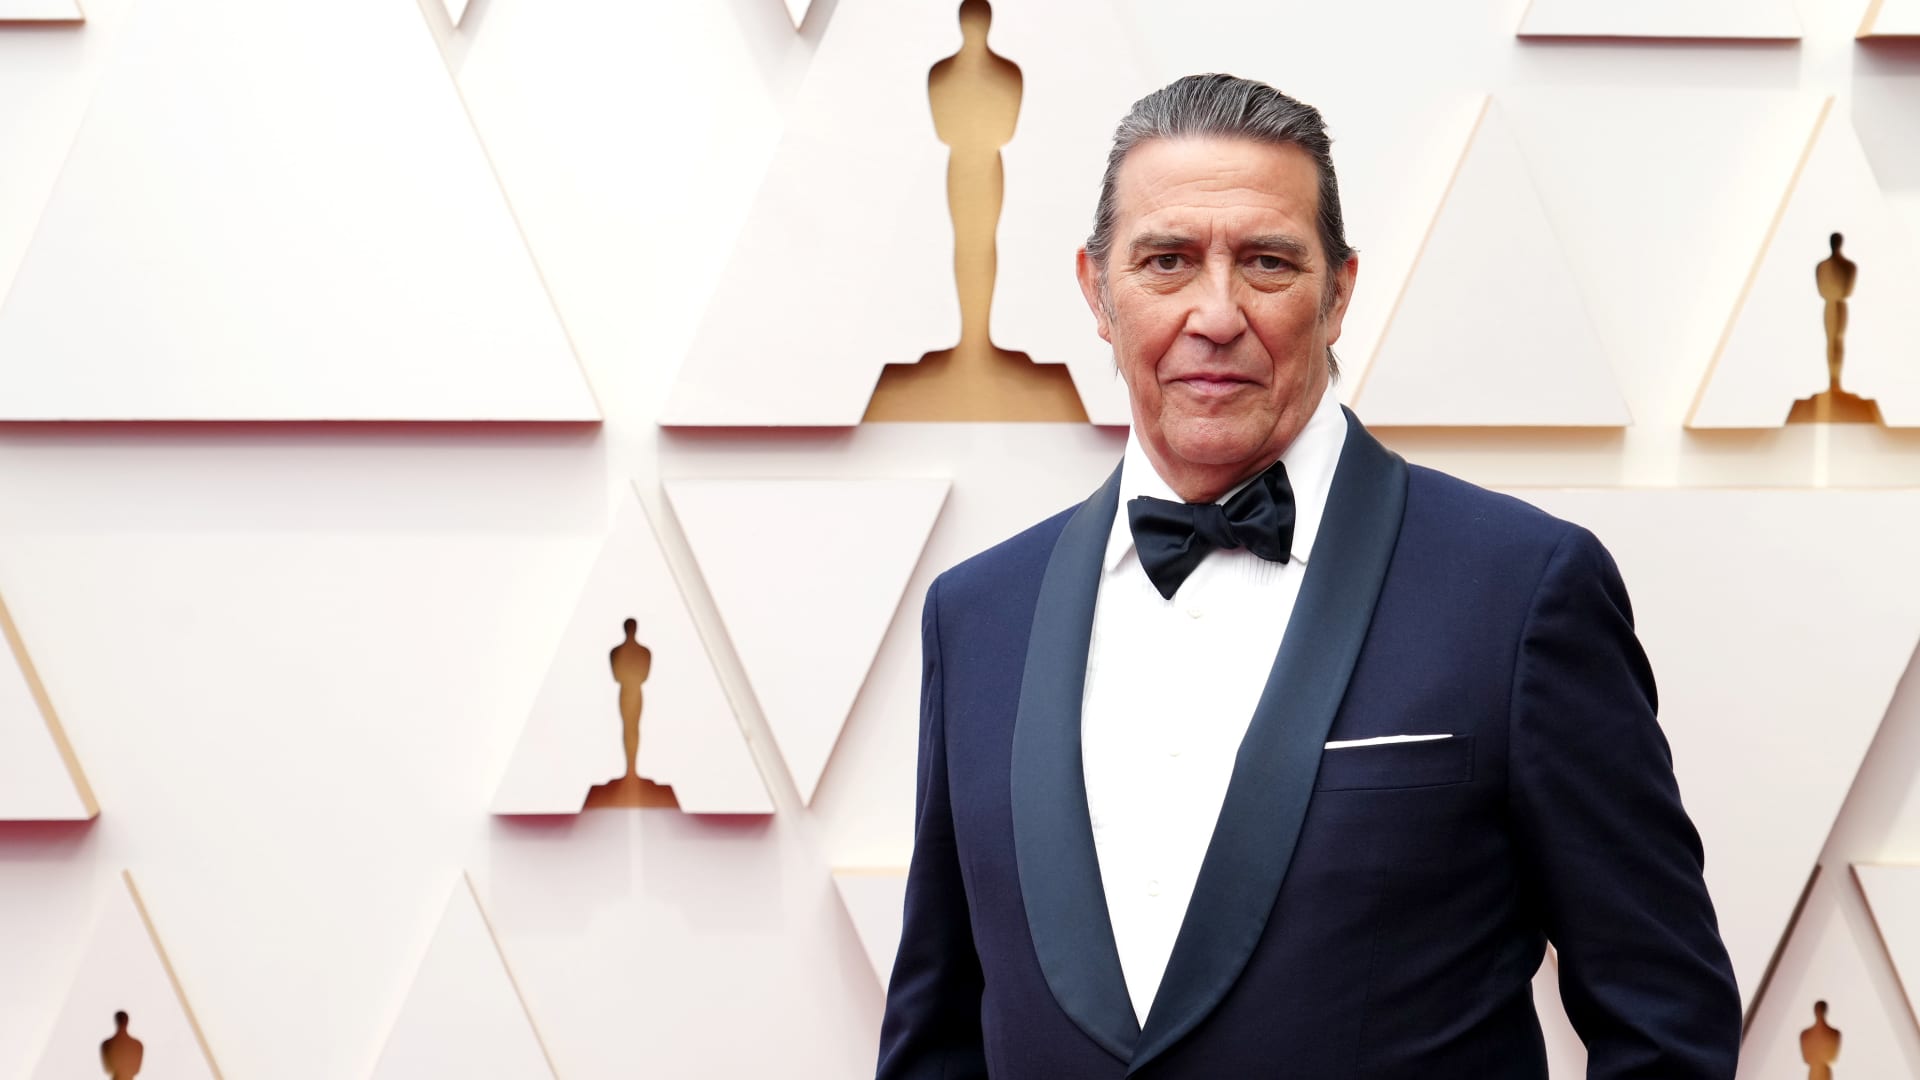 Ciarán Hinds attends the 94th Annual Academy Awards at Hollywood and Highland on March 27, 2022 in Hollywood, California.